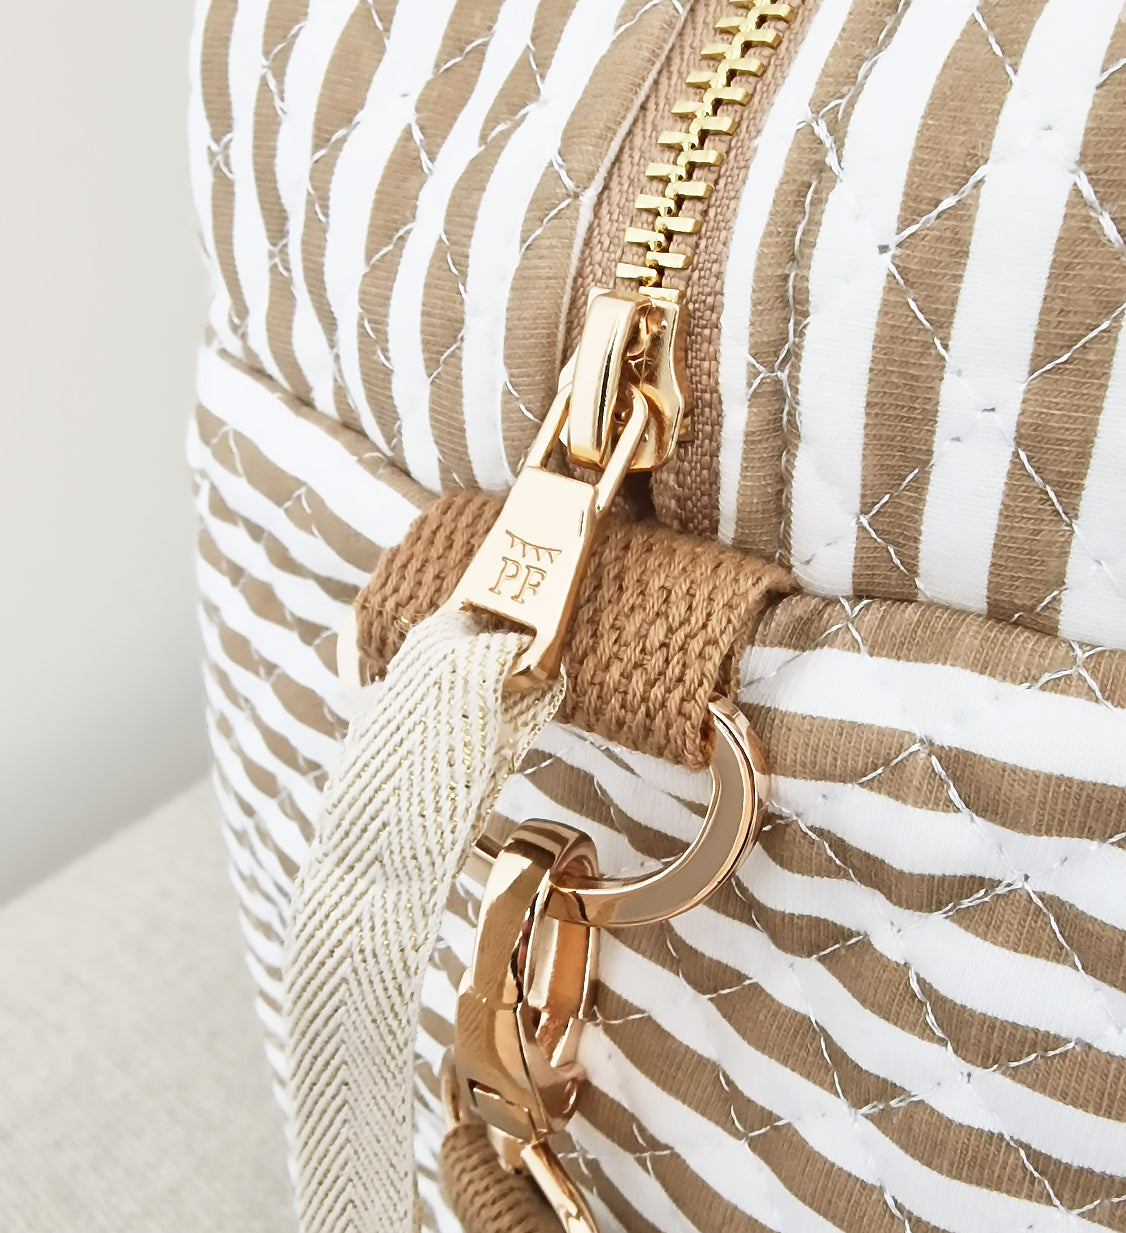 Quilted Mommy Bag - Striped - Petit Filippe